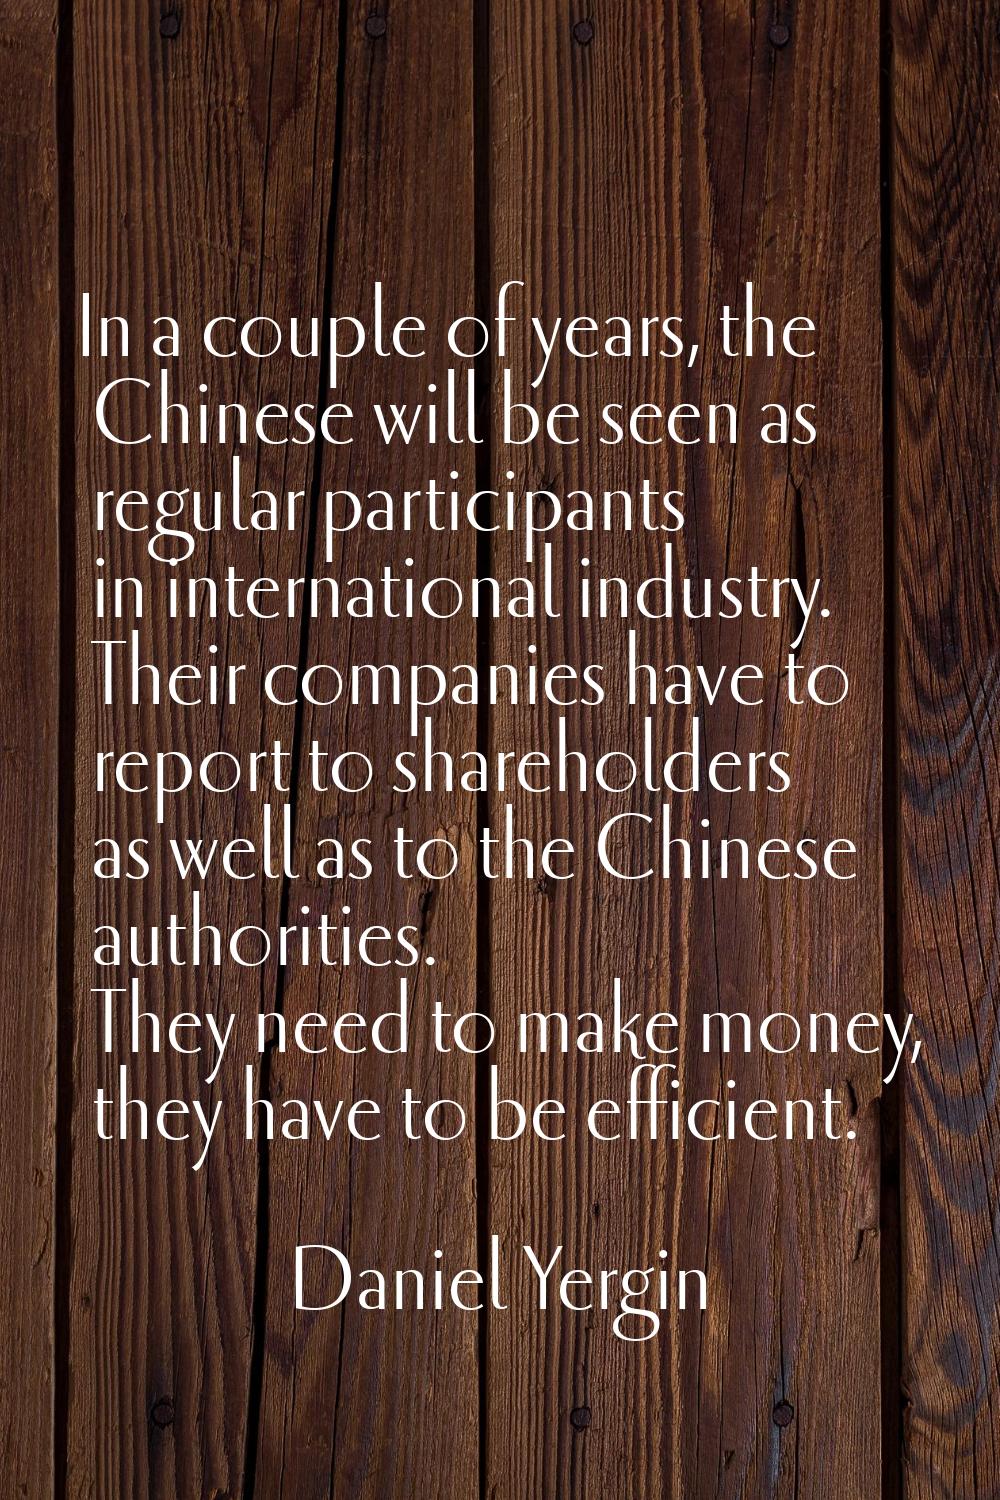 In a couple of years, the Chinese will be seen as regular participants in international industry. T